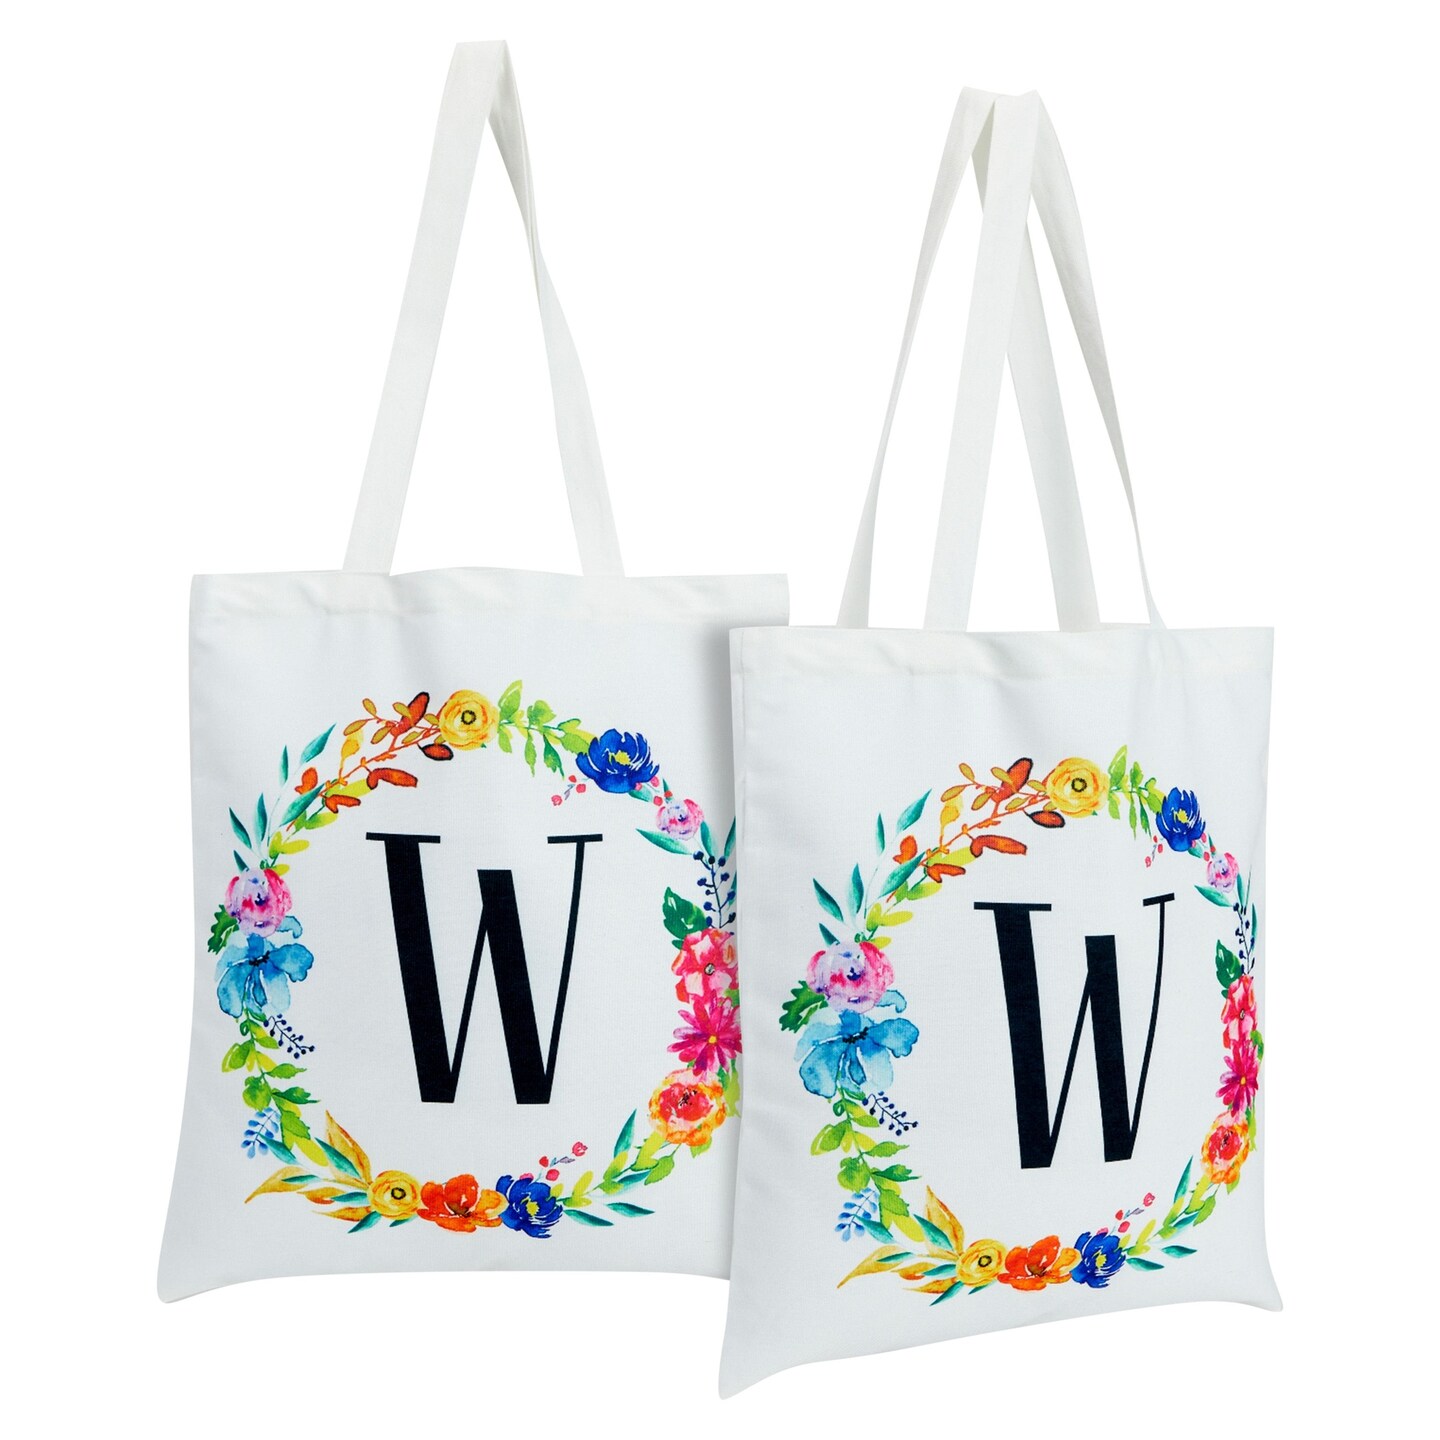 Personalized Tote Bags - Sandjest